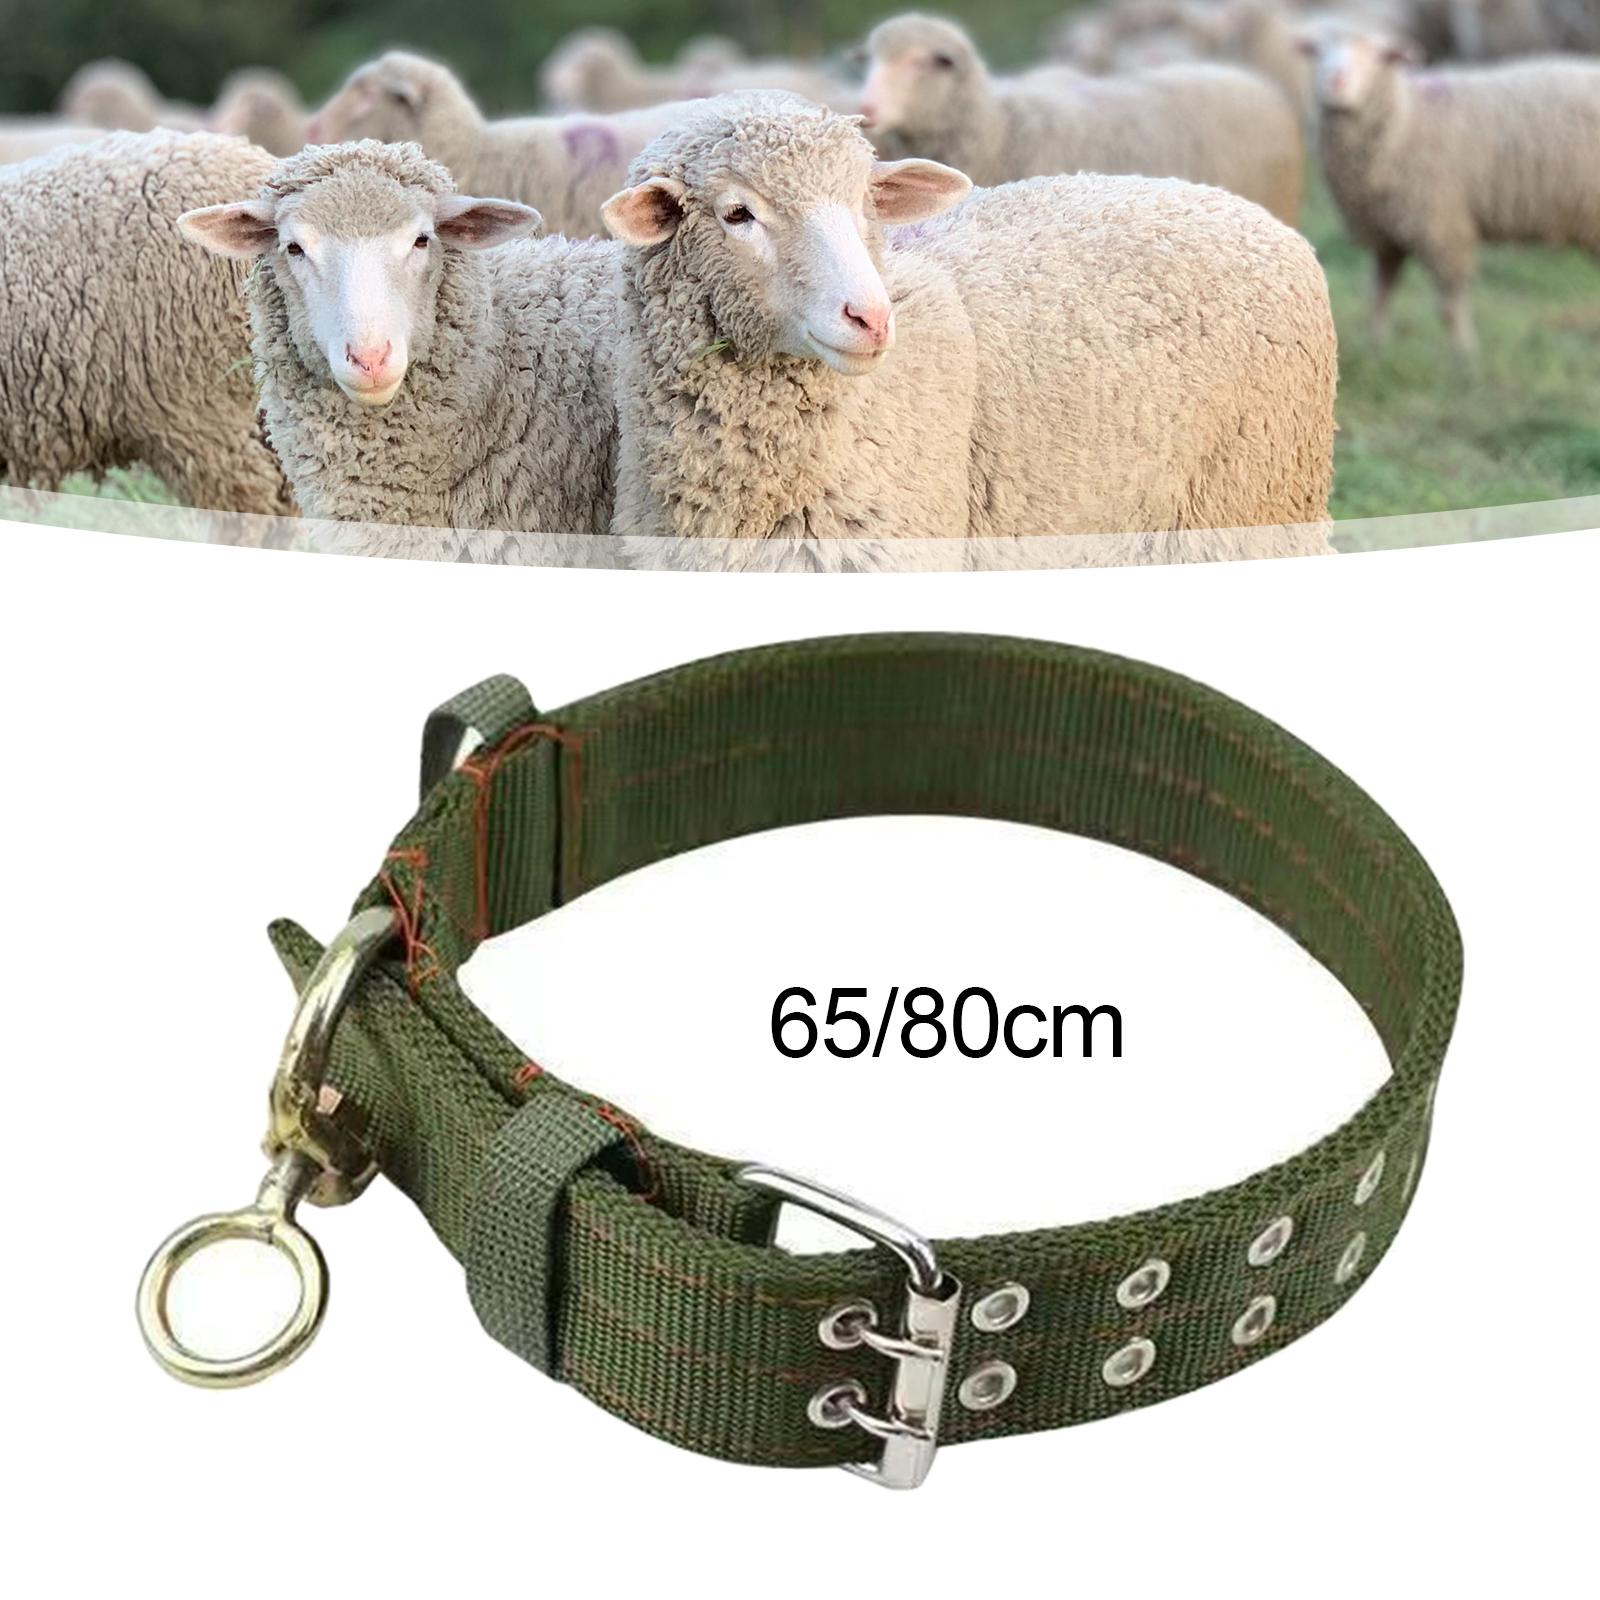 Multifunction Cow Collar Oxford Cloth Adjustable Thicken for Sheep Cow 65cm